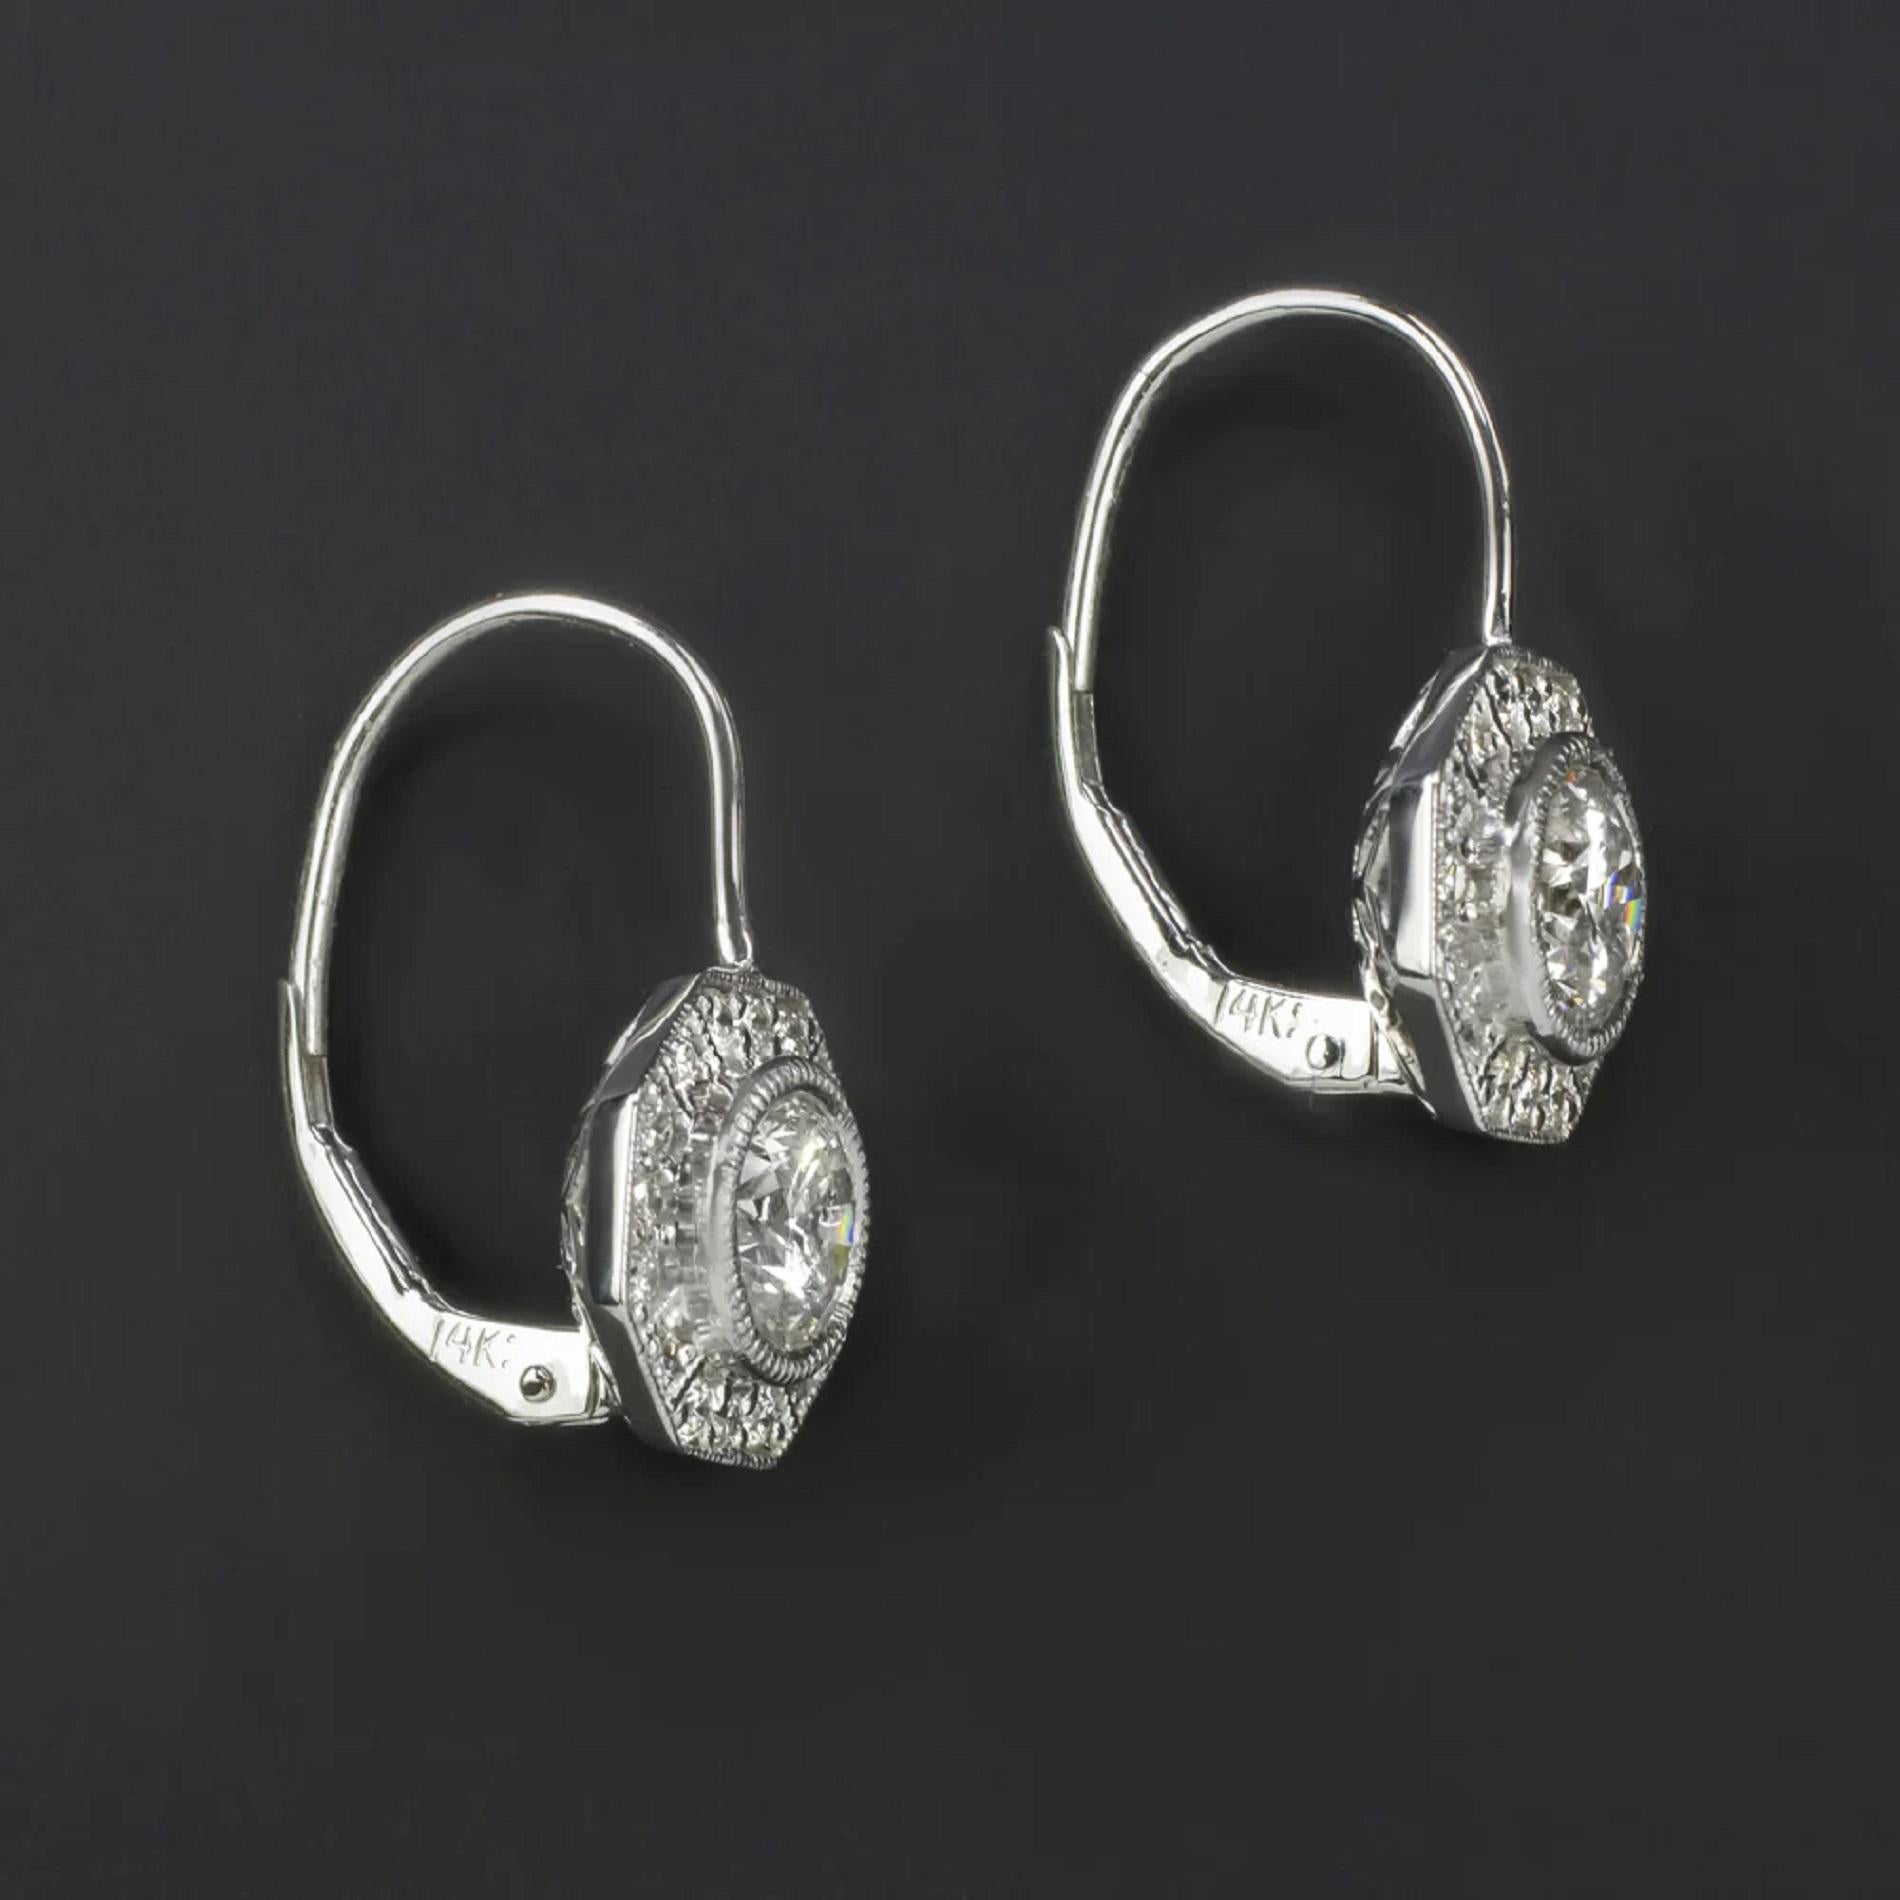 These diamond drop earrings offer an utterly classic look with a 1.54ct pair of diamond surrounded by vintage style octagon shaped halos.

Highlights:

- 1.54ct pair of natural diamond center stones

- Center diamonds are bright white with vibrant